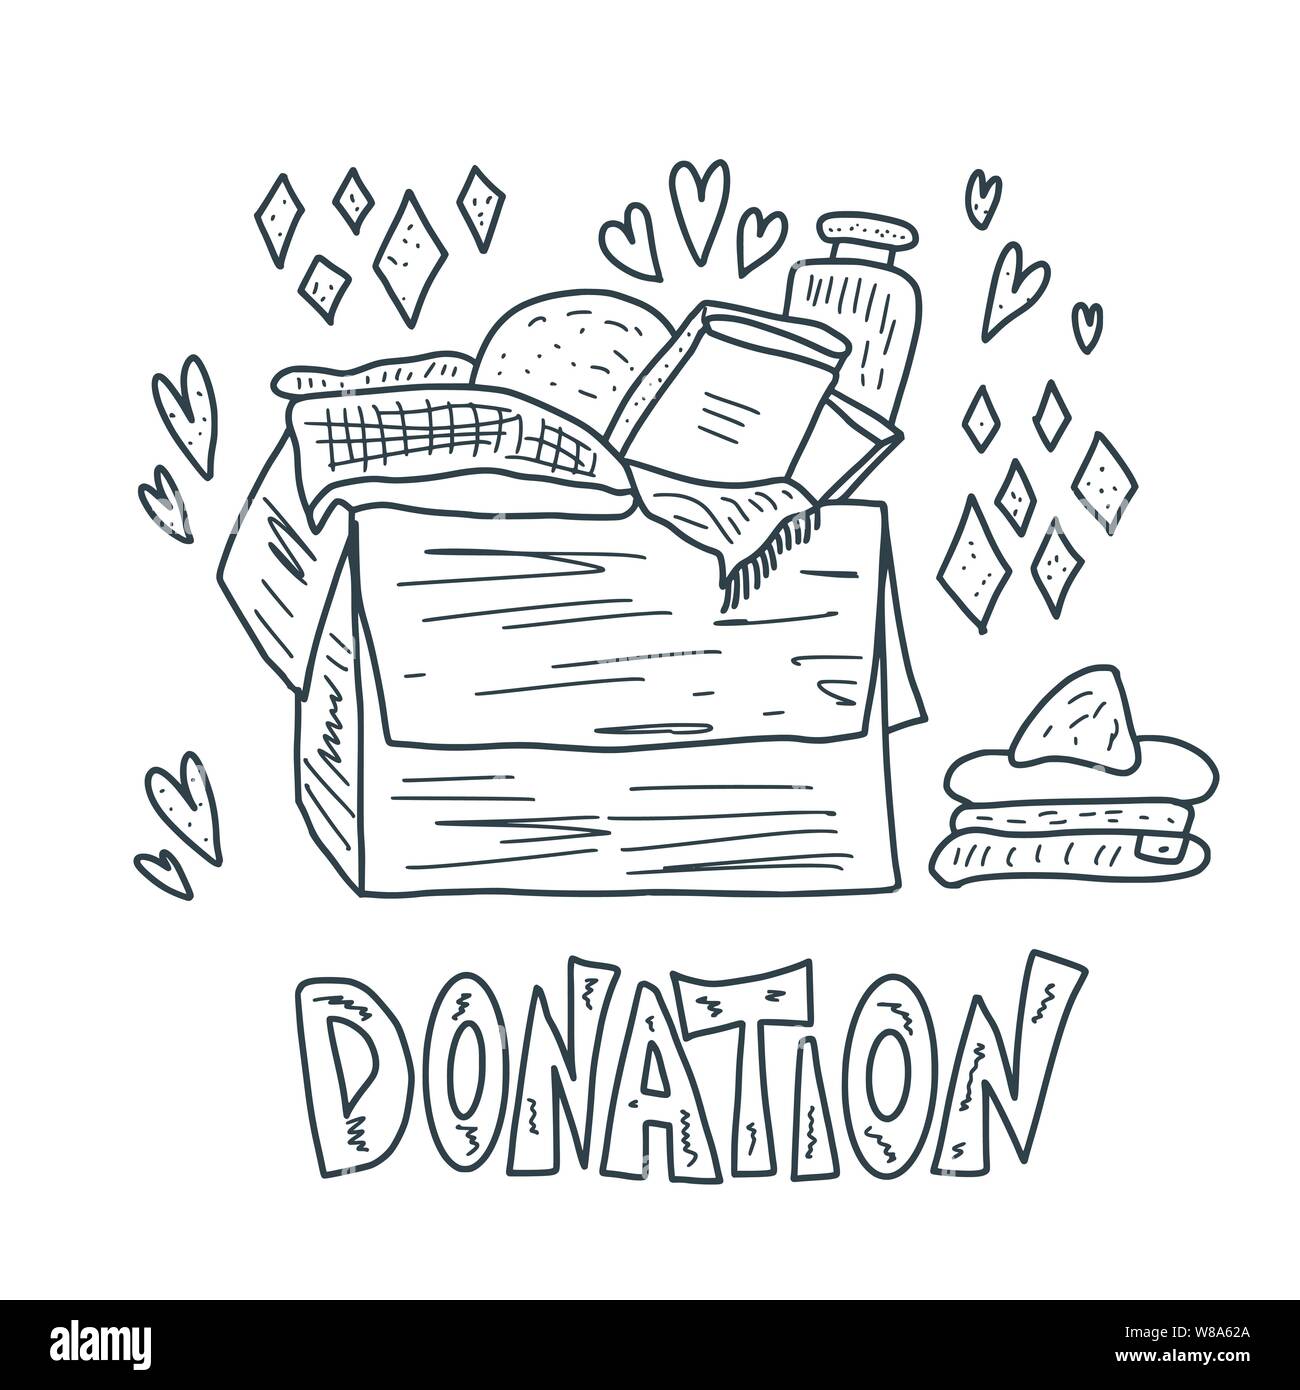 Donation box isolated on white background. Charity elements. Vector sketch illustration. Stock Vector